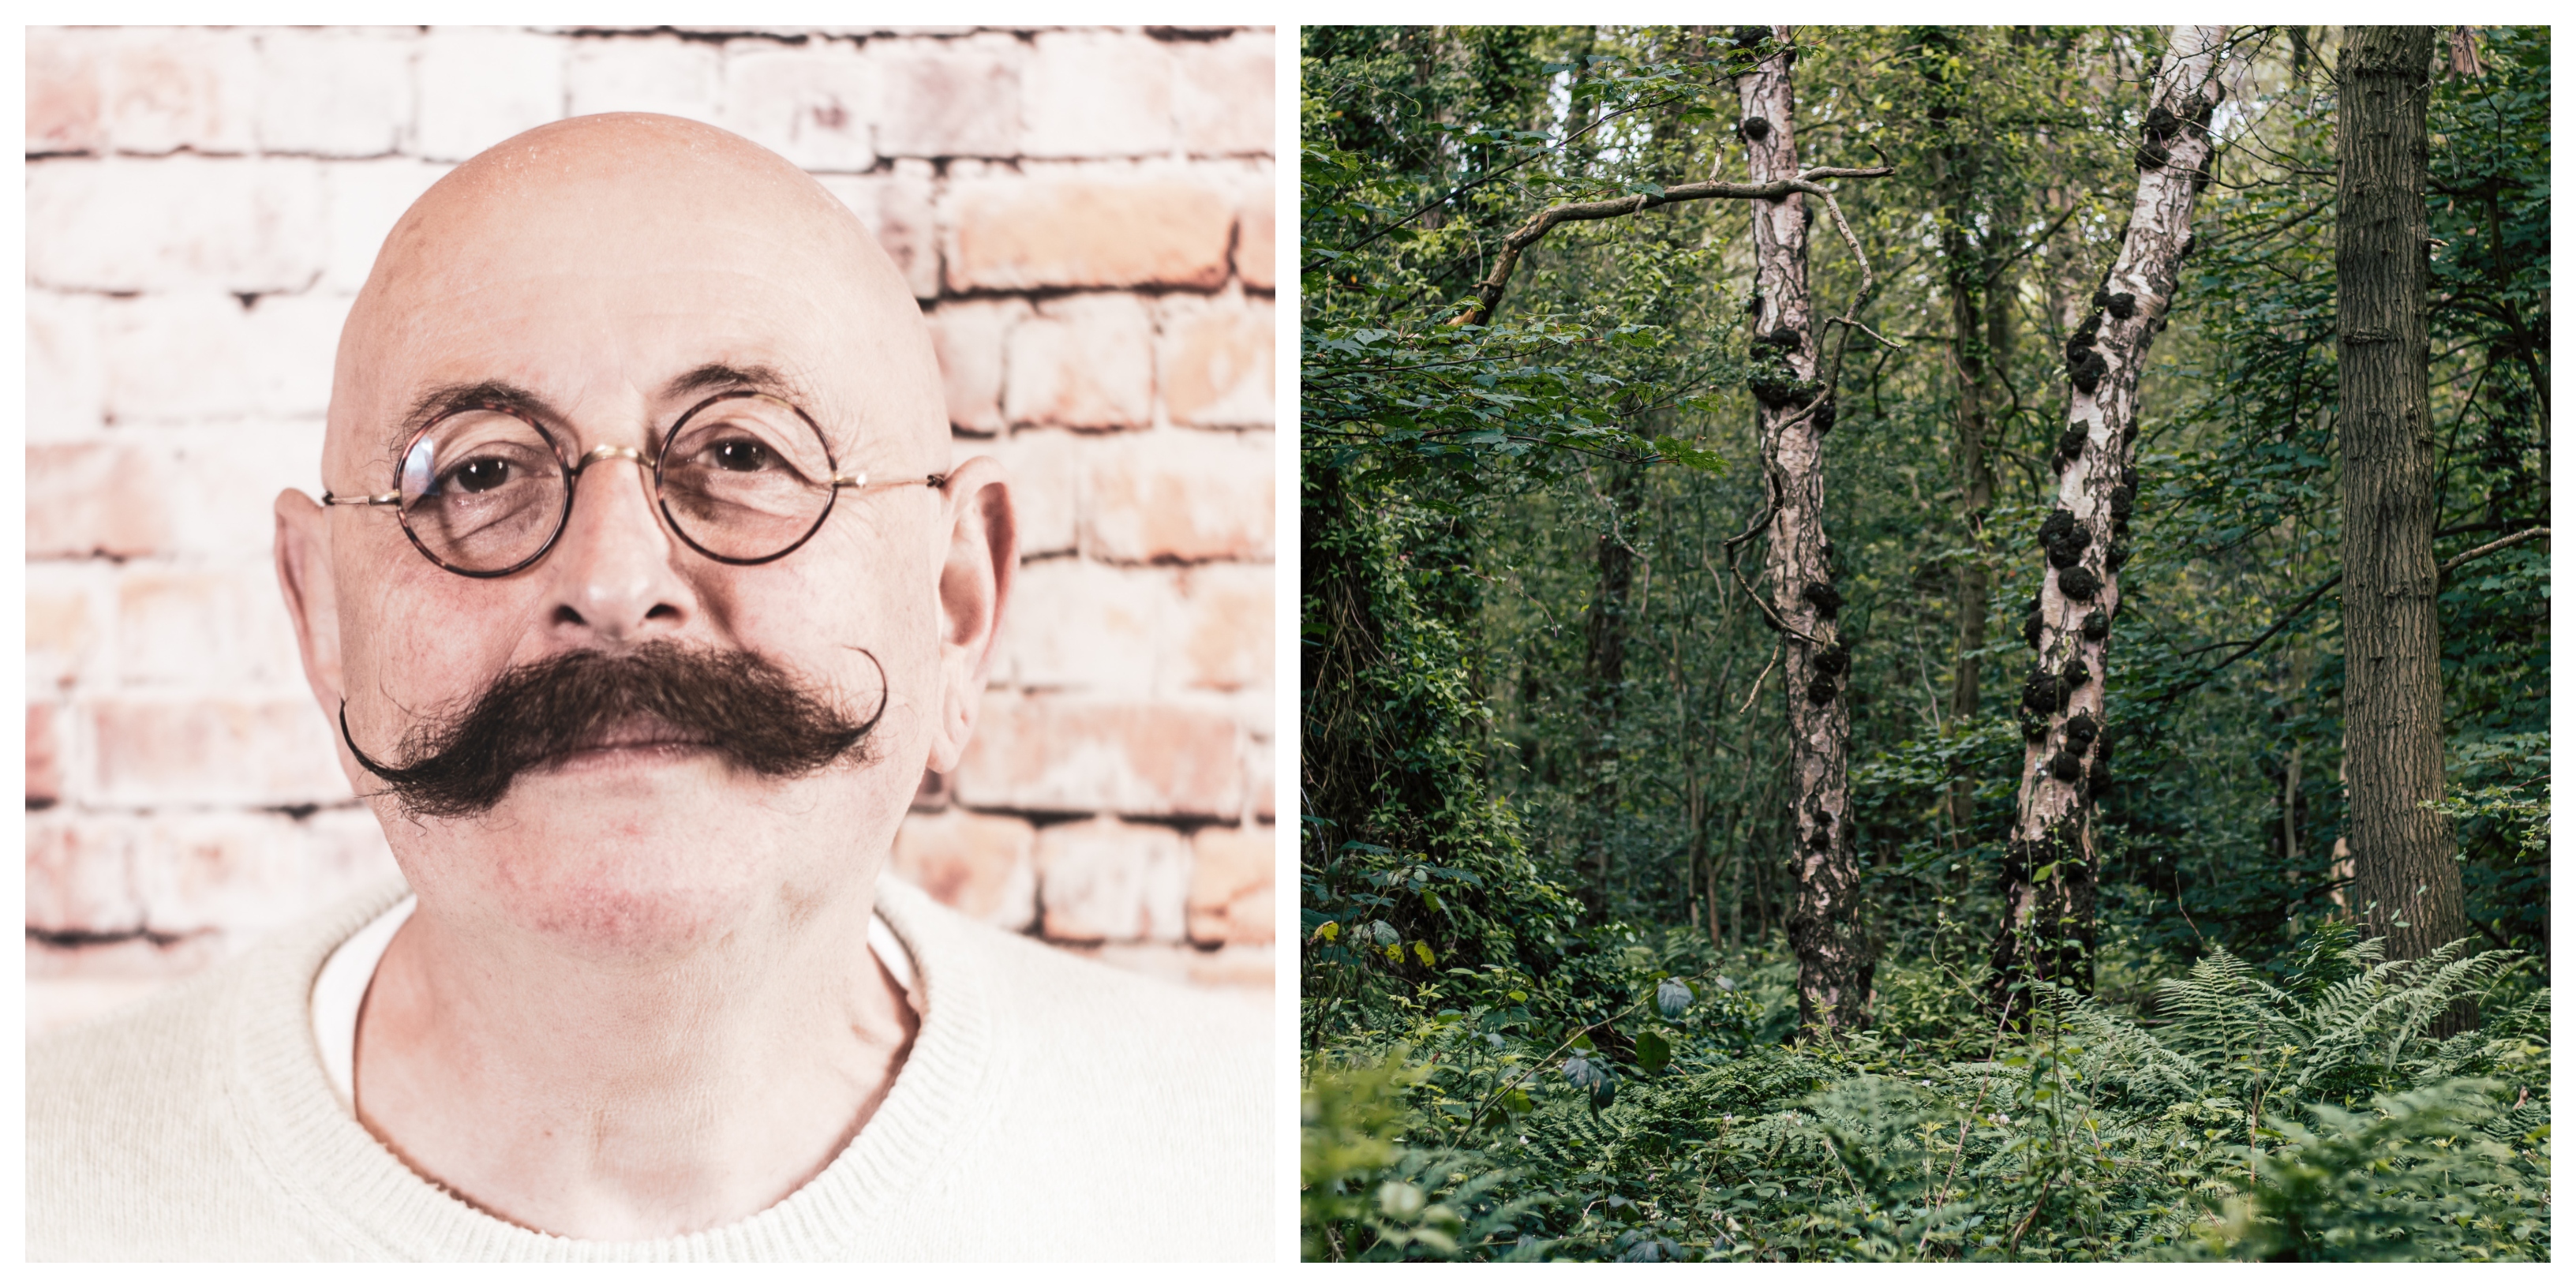 MA Show 2019 - Photography, Photography show - two images side-by-side, left image is a man with round glasses and a moustache, the right image is a forest